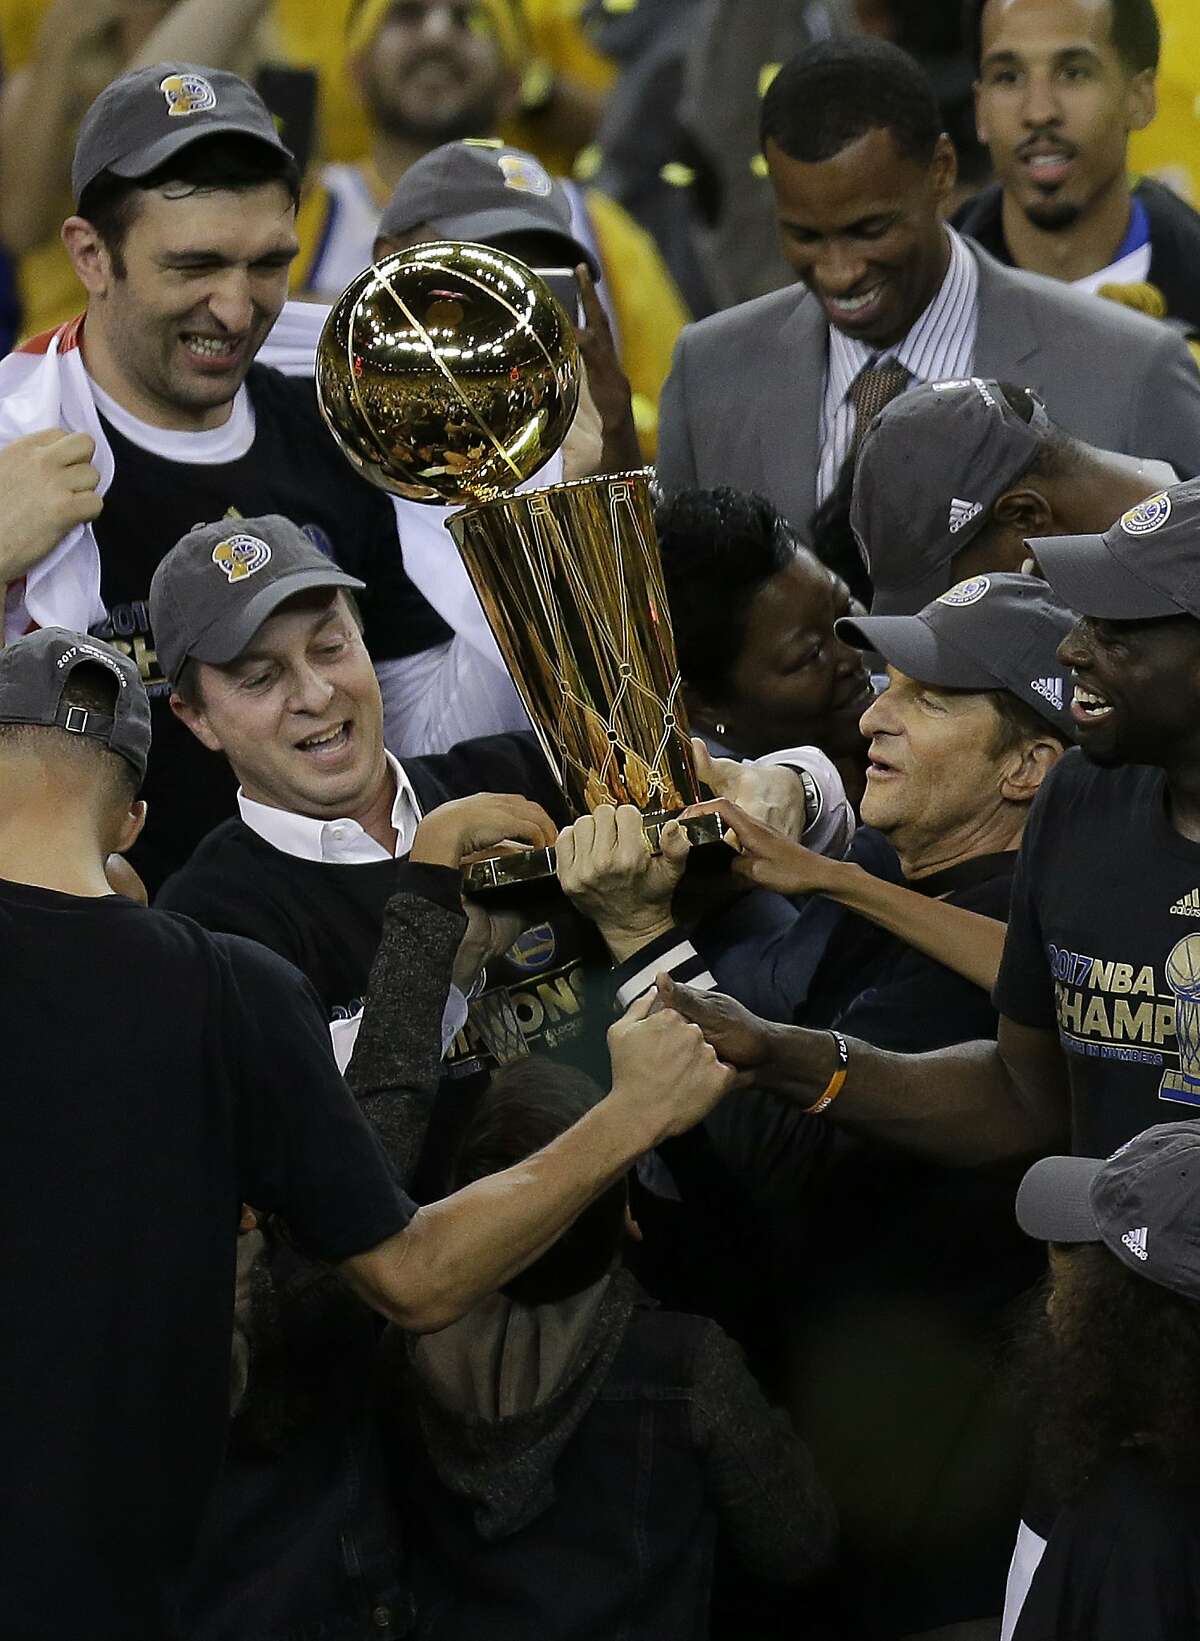 Golden State Warriors owners Joe Lacob, center left, and Peter Guber, center right, hold up the Larry O'Brien NBA Championship Trophy after Game 5 of basketball's NBA Finals between the Warriors and the Cleveland Cavaliers in Oakland, Calif., Monday, June 12, 2017. The Warriors won 129-120 to win the NBA championship.. (AP Photo/Ben Margot)